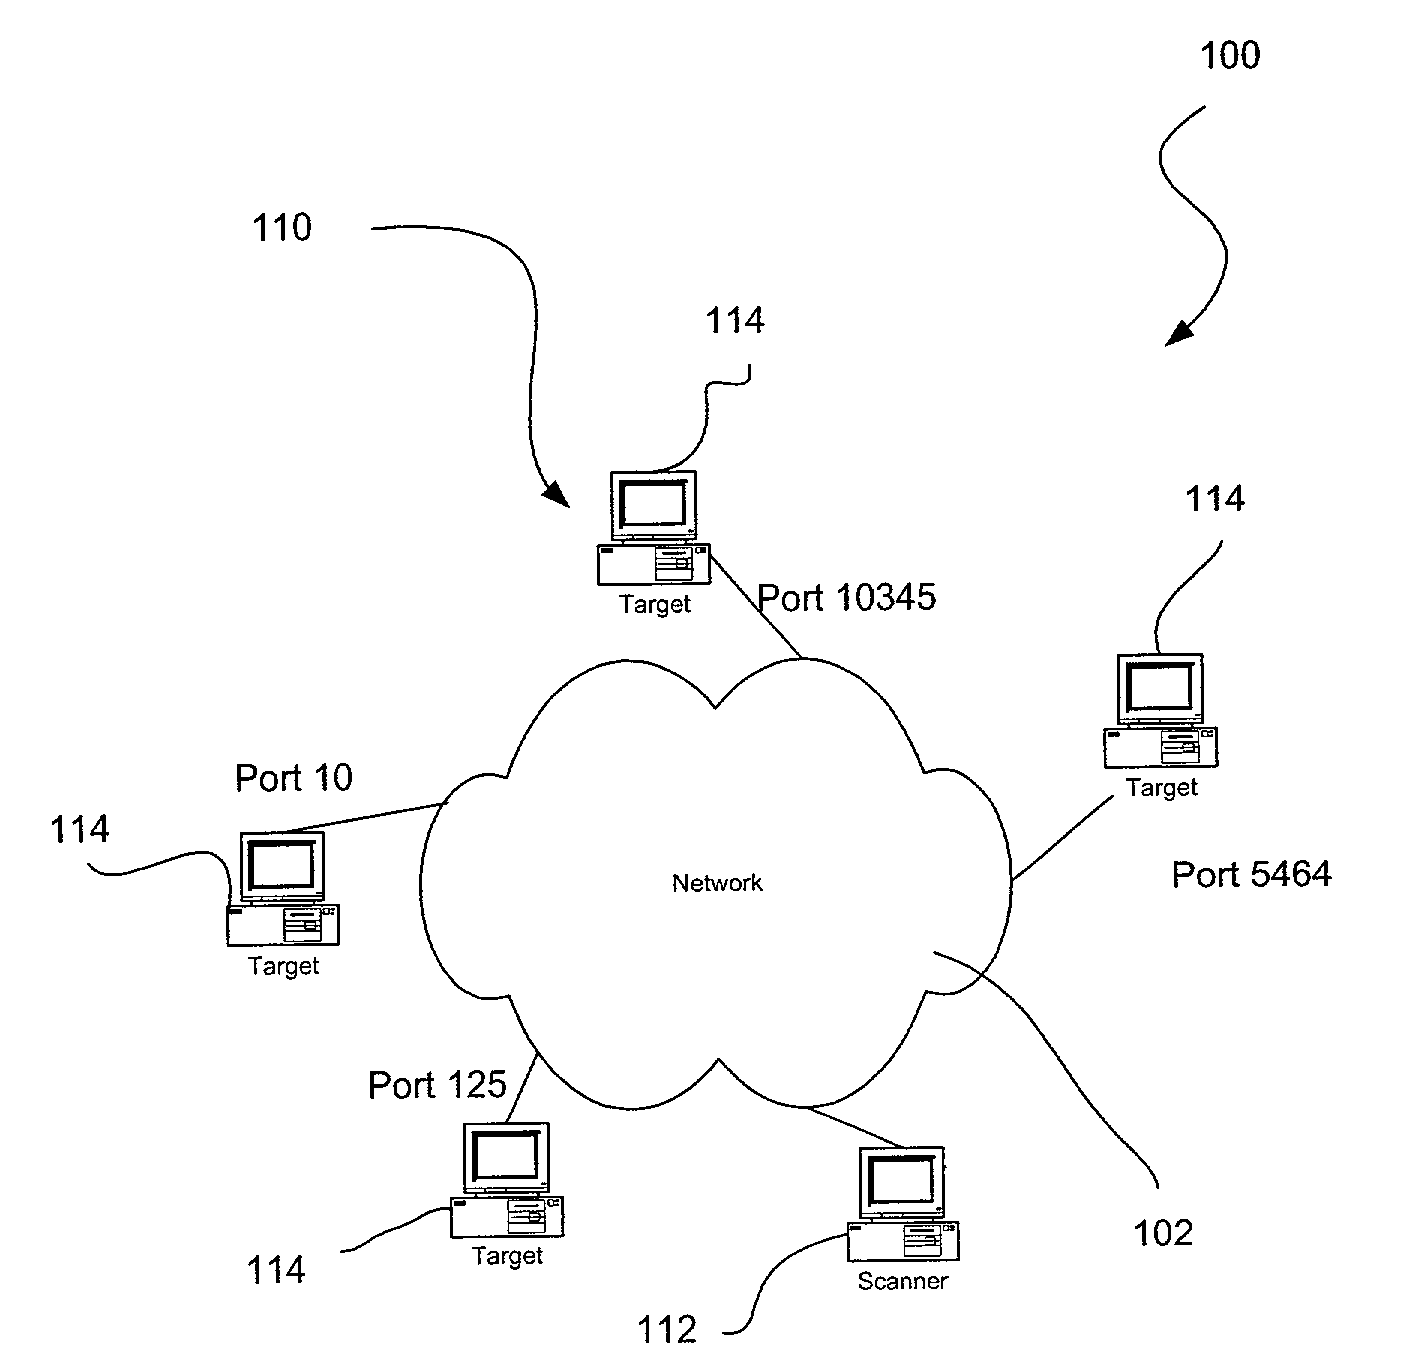 System, method and computer program product for improved efficiency in network assessment utilizing a port status pre-qualification procedure